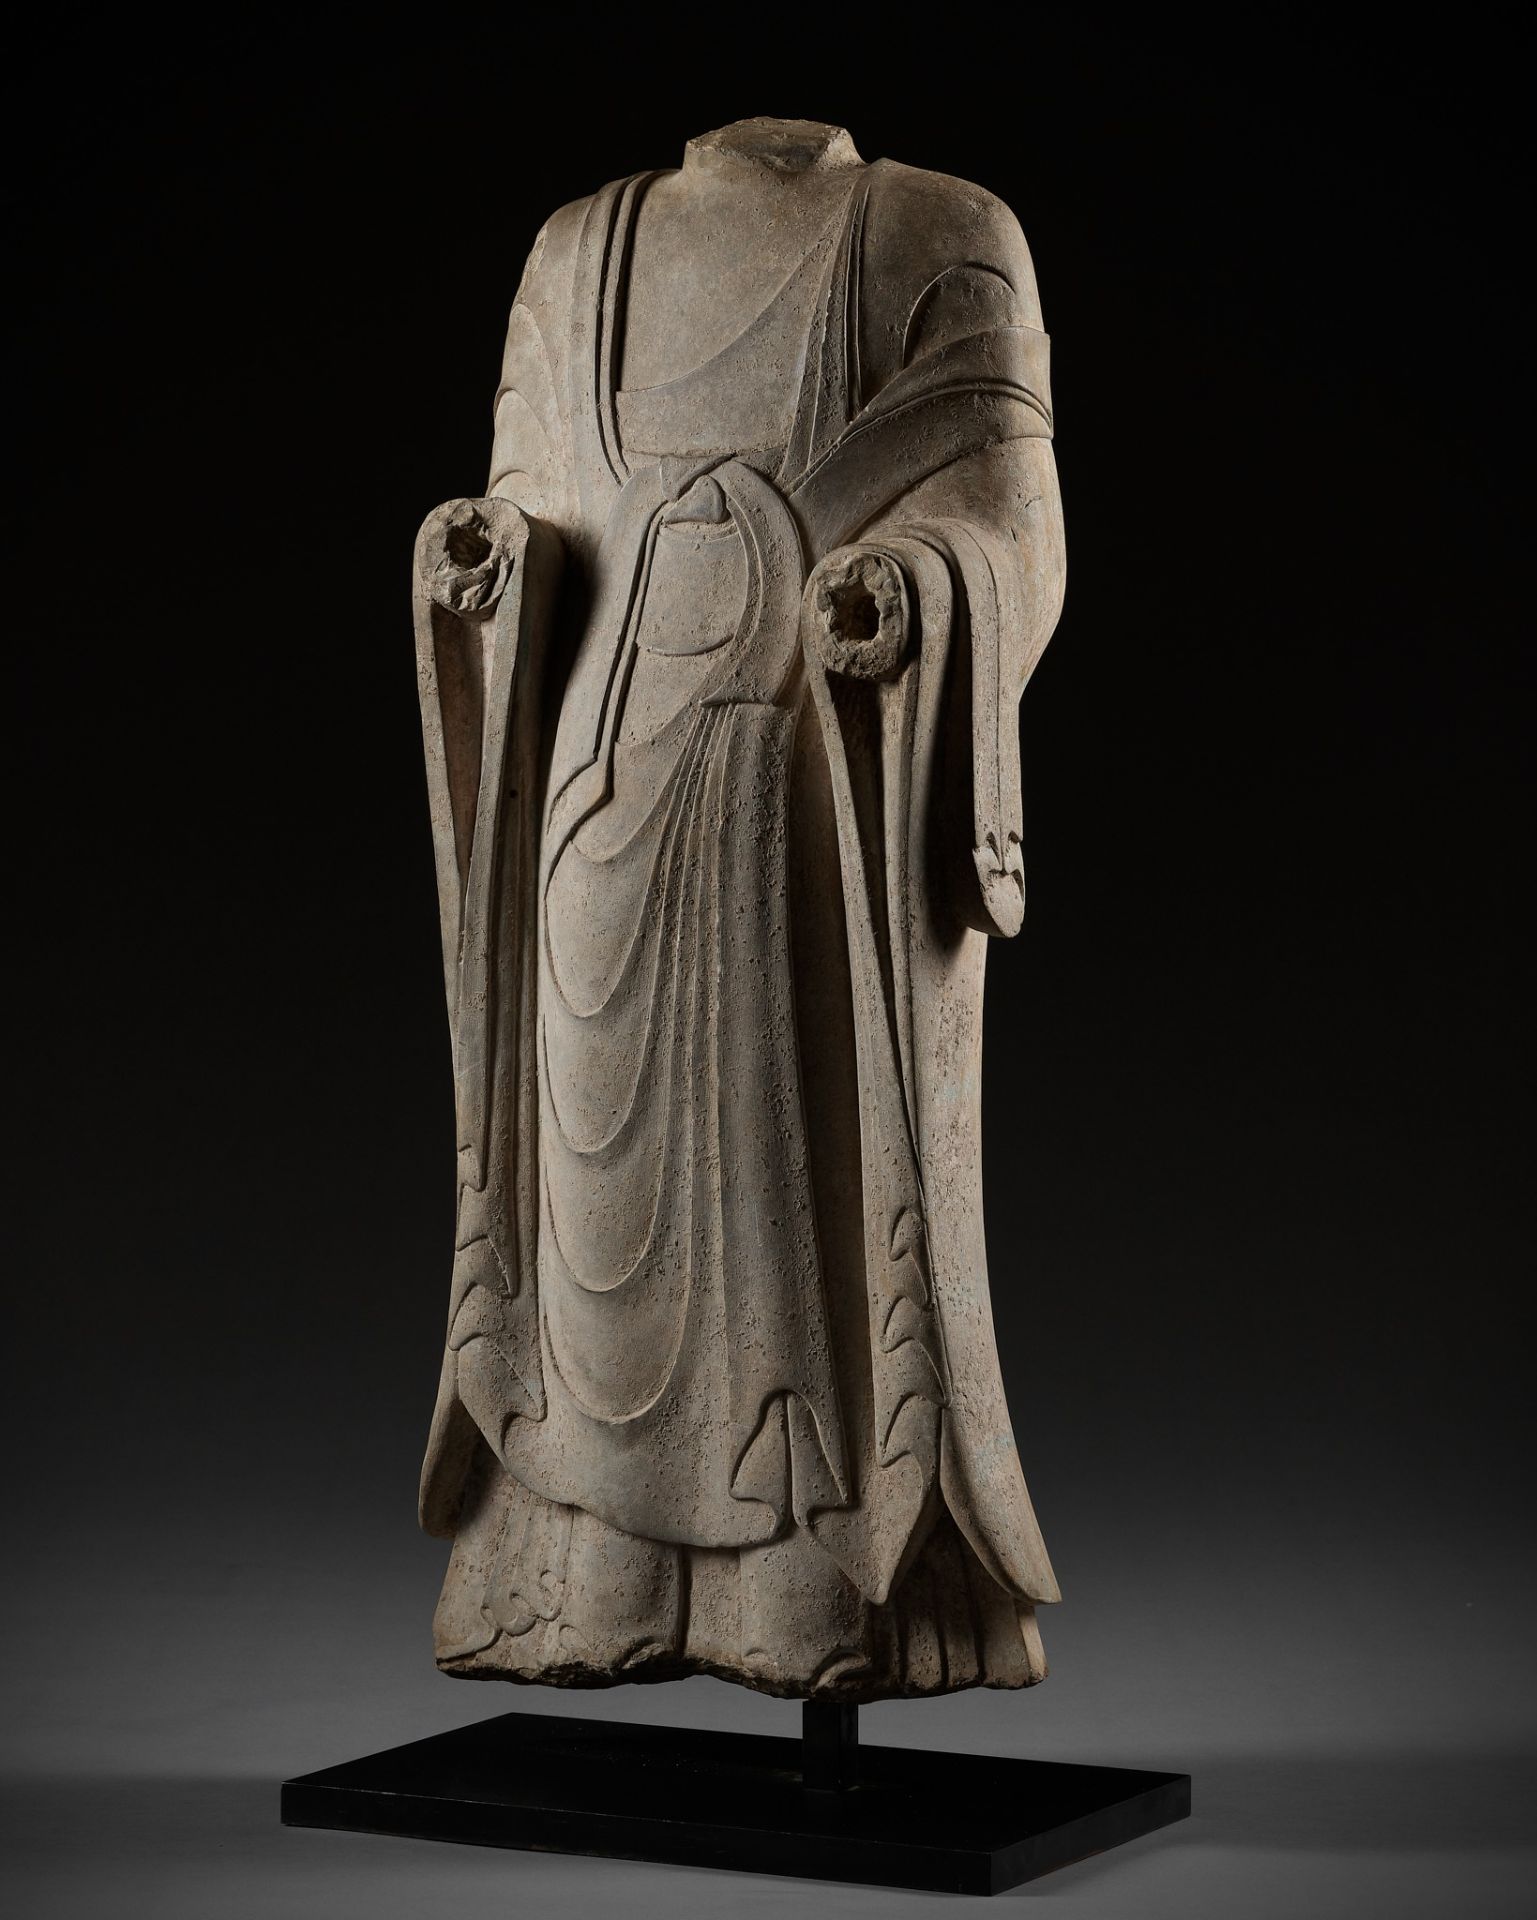 A LARGE AND HIGHLY IMPORTANT WHITE MARBLE TORSO OF BUDDHA, NOTHERN QI DYNASTY